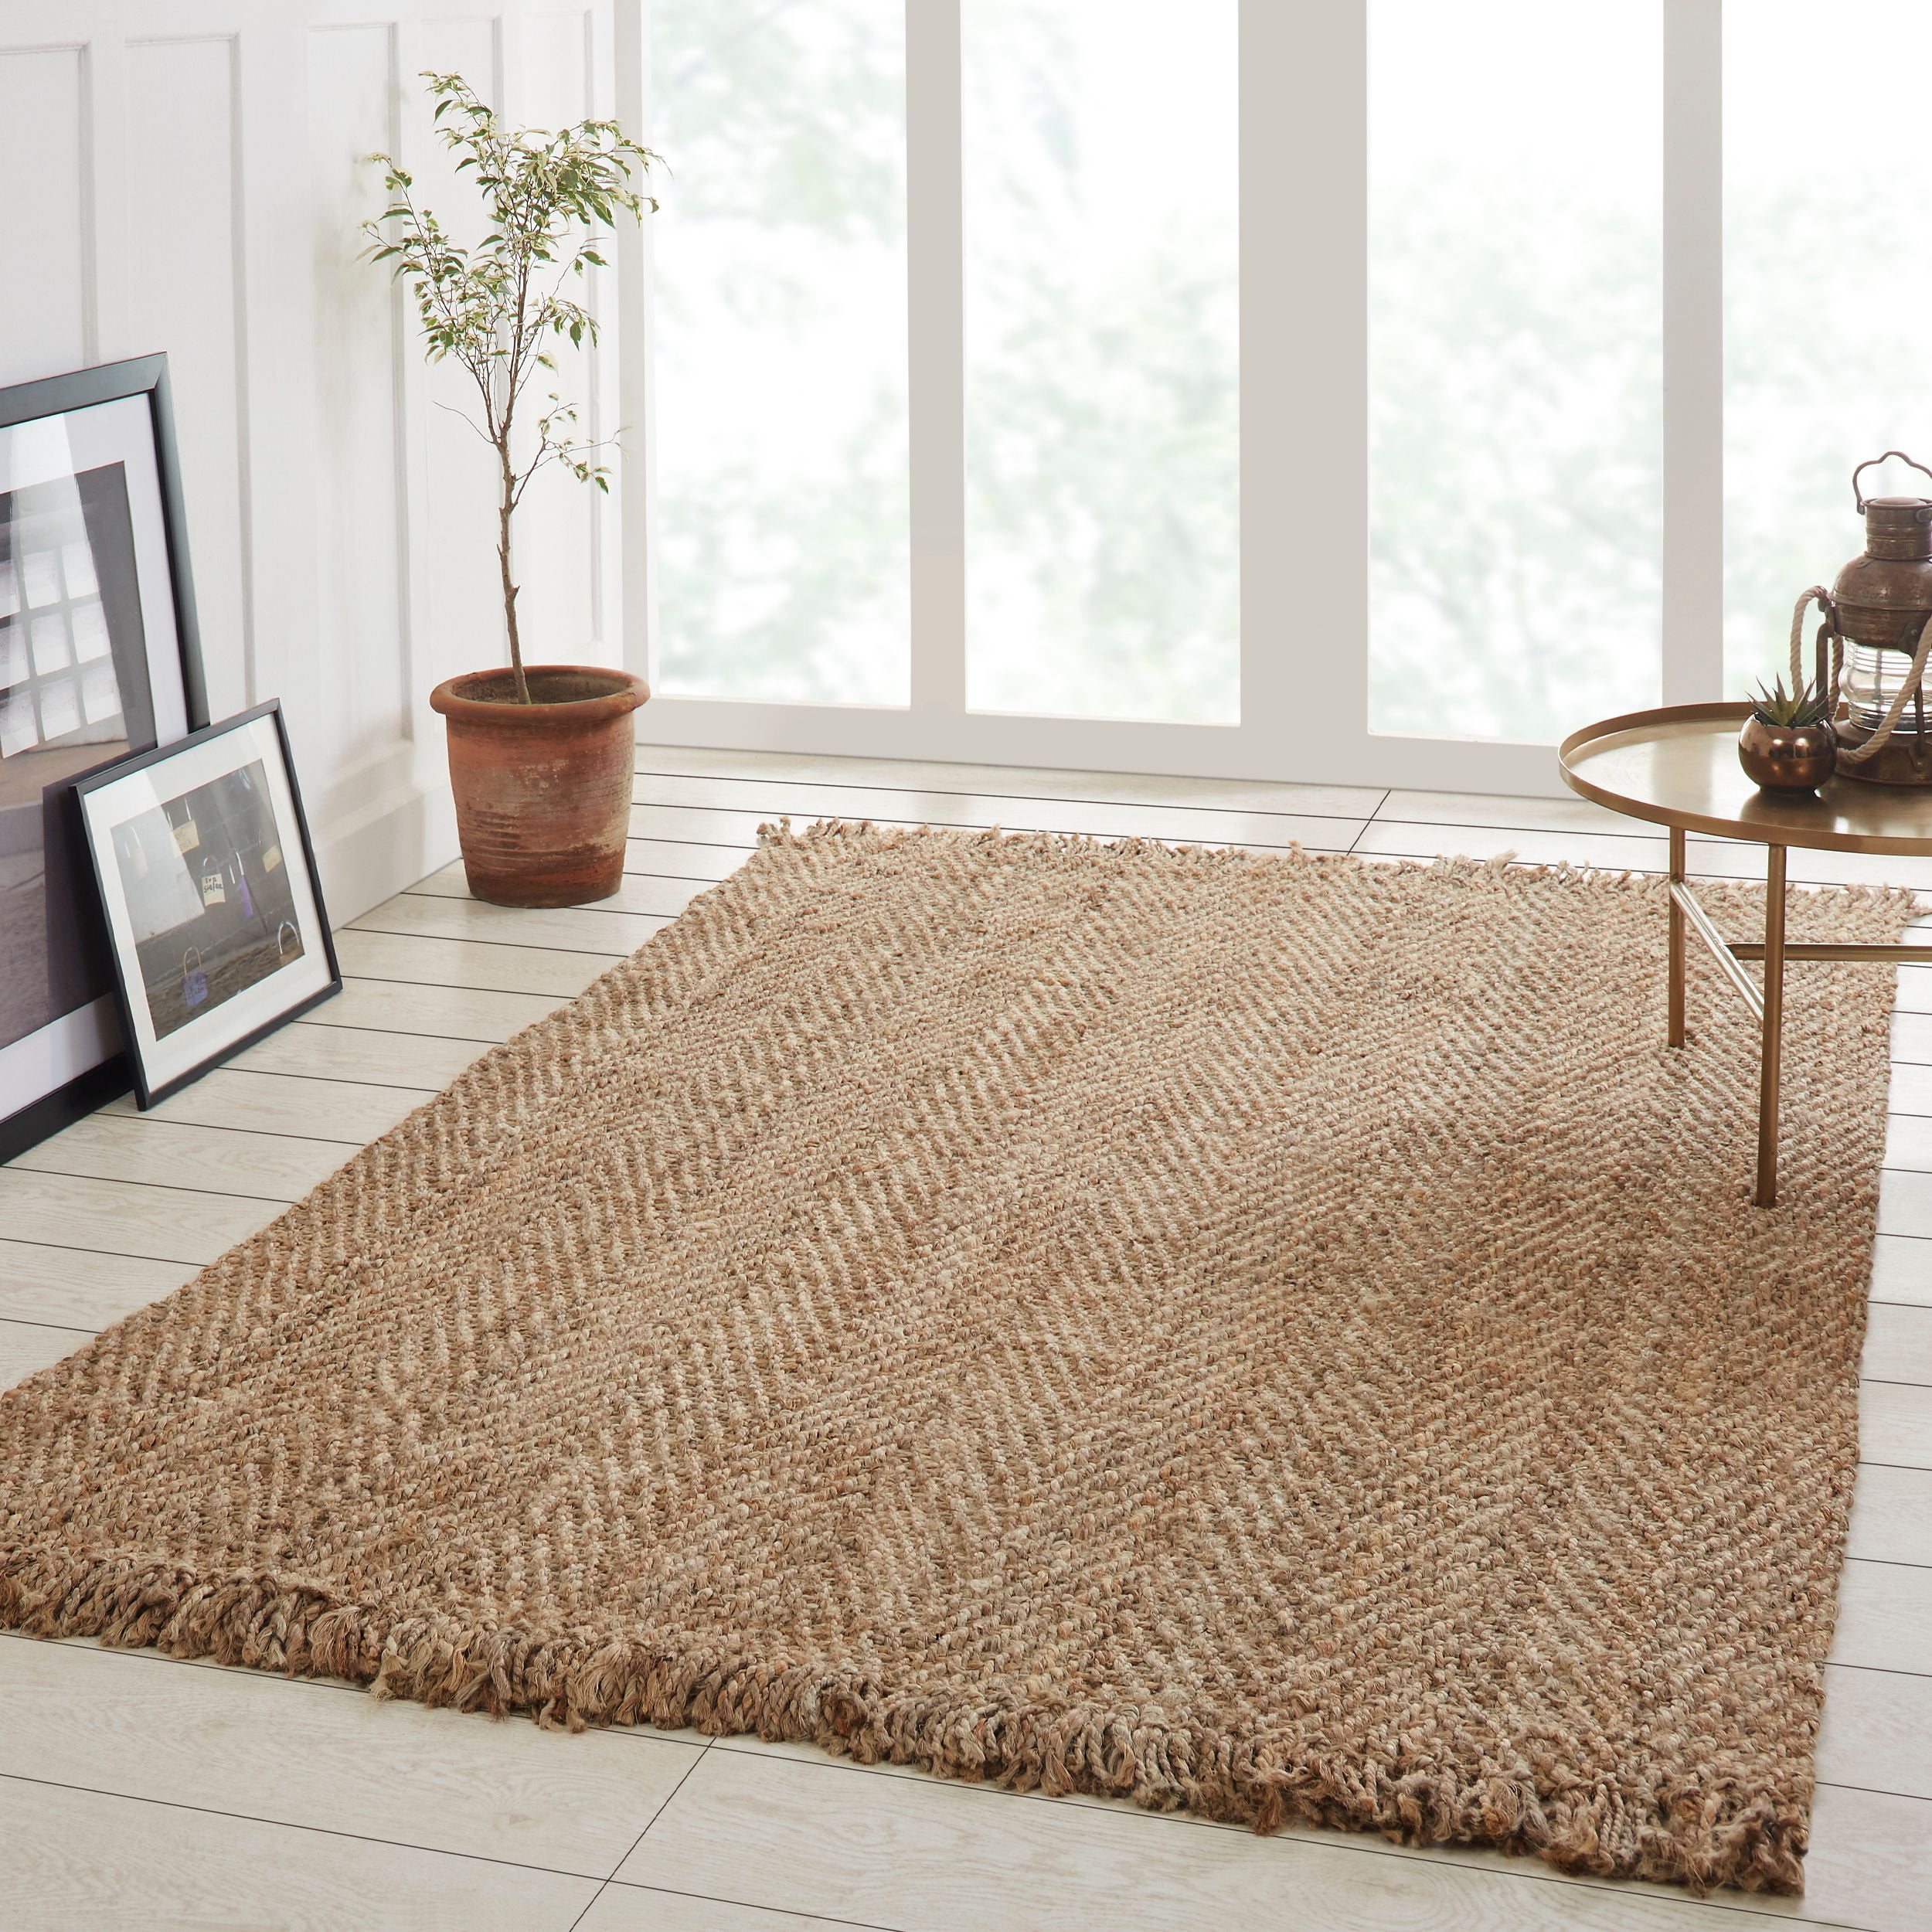 Rustic american flag braided area rug /& runner many sizes available! 